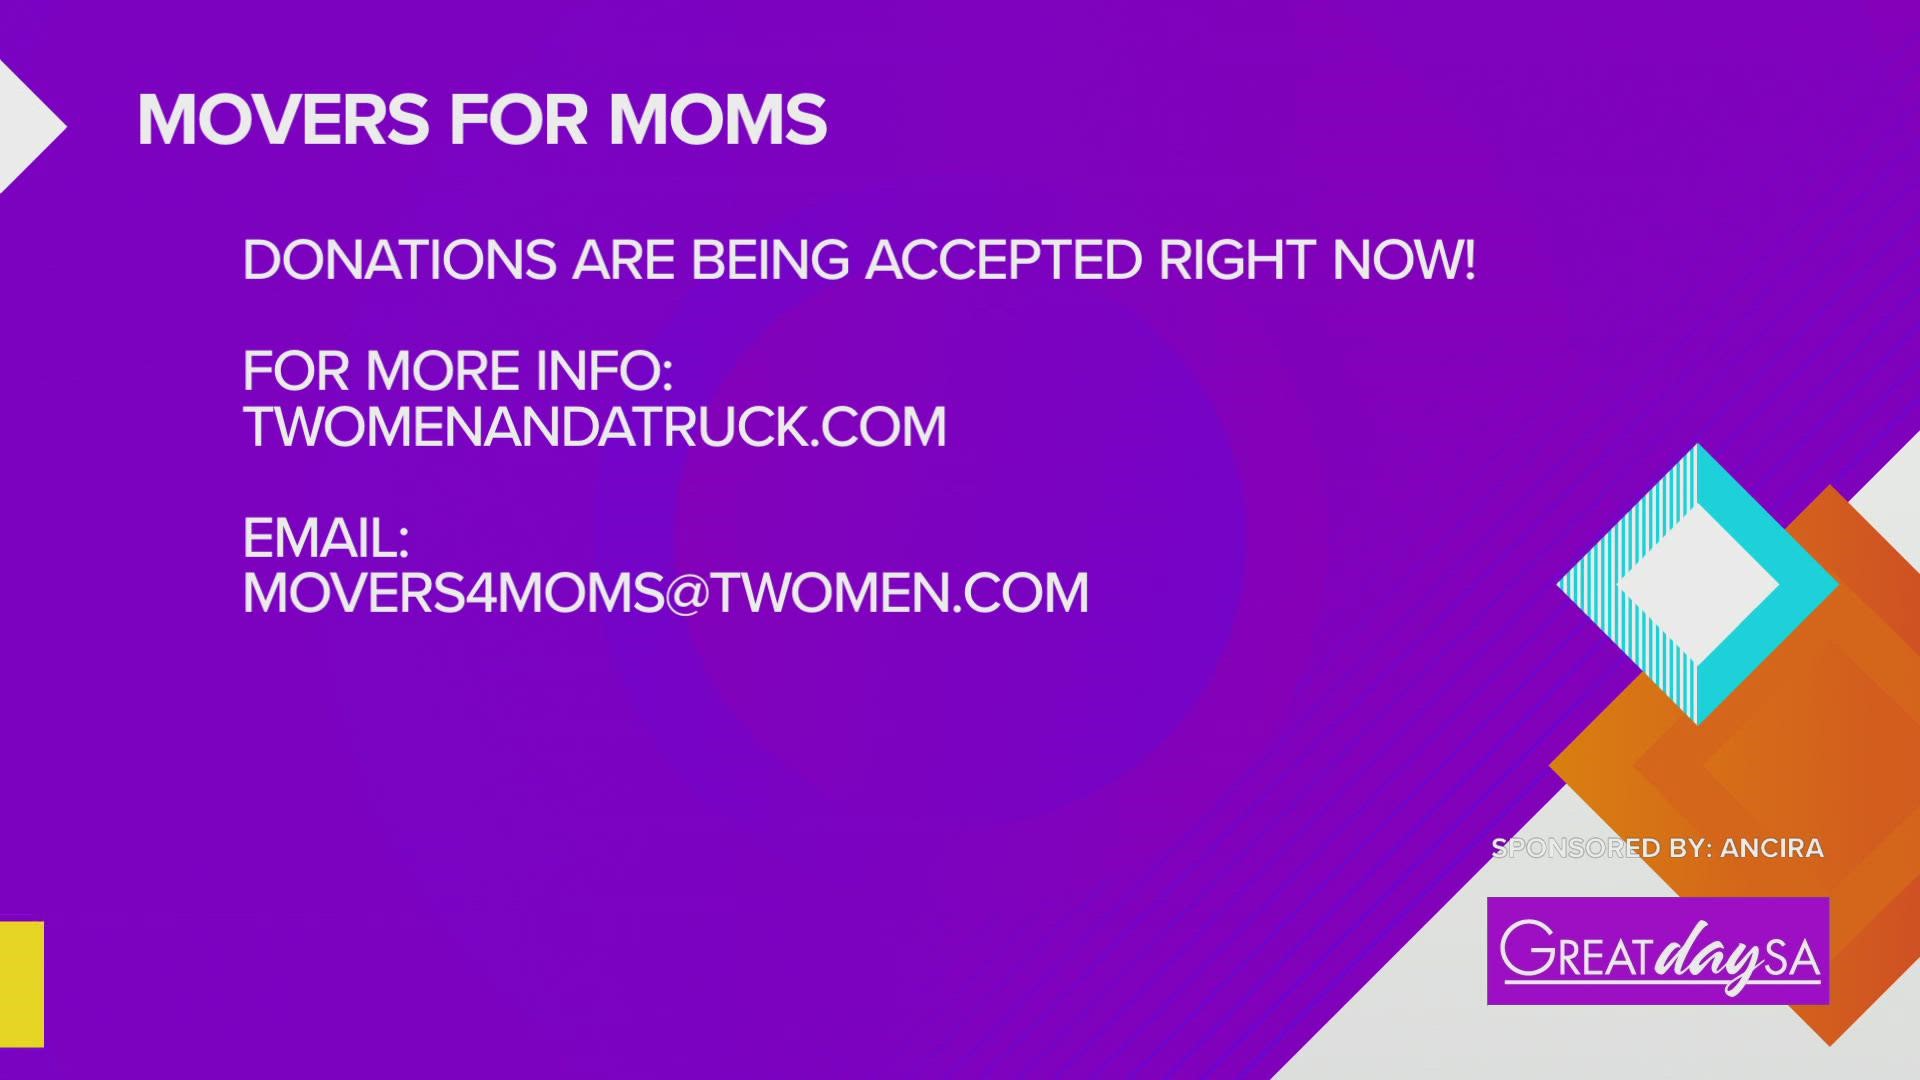 The company 'Two Men and a Truck' kickstarted the initiative 'Movers for Moms'